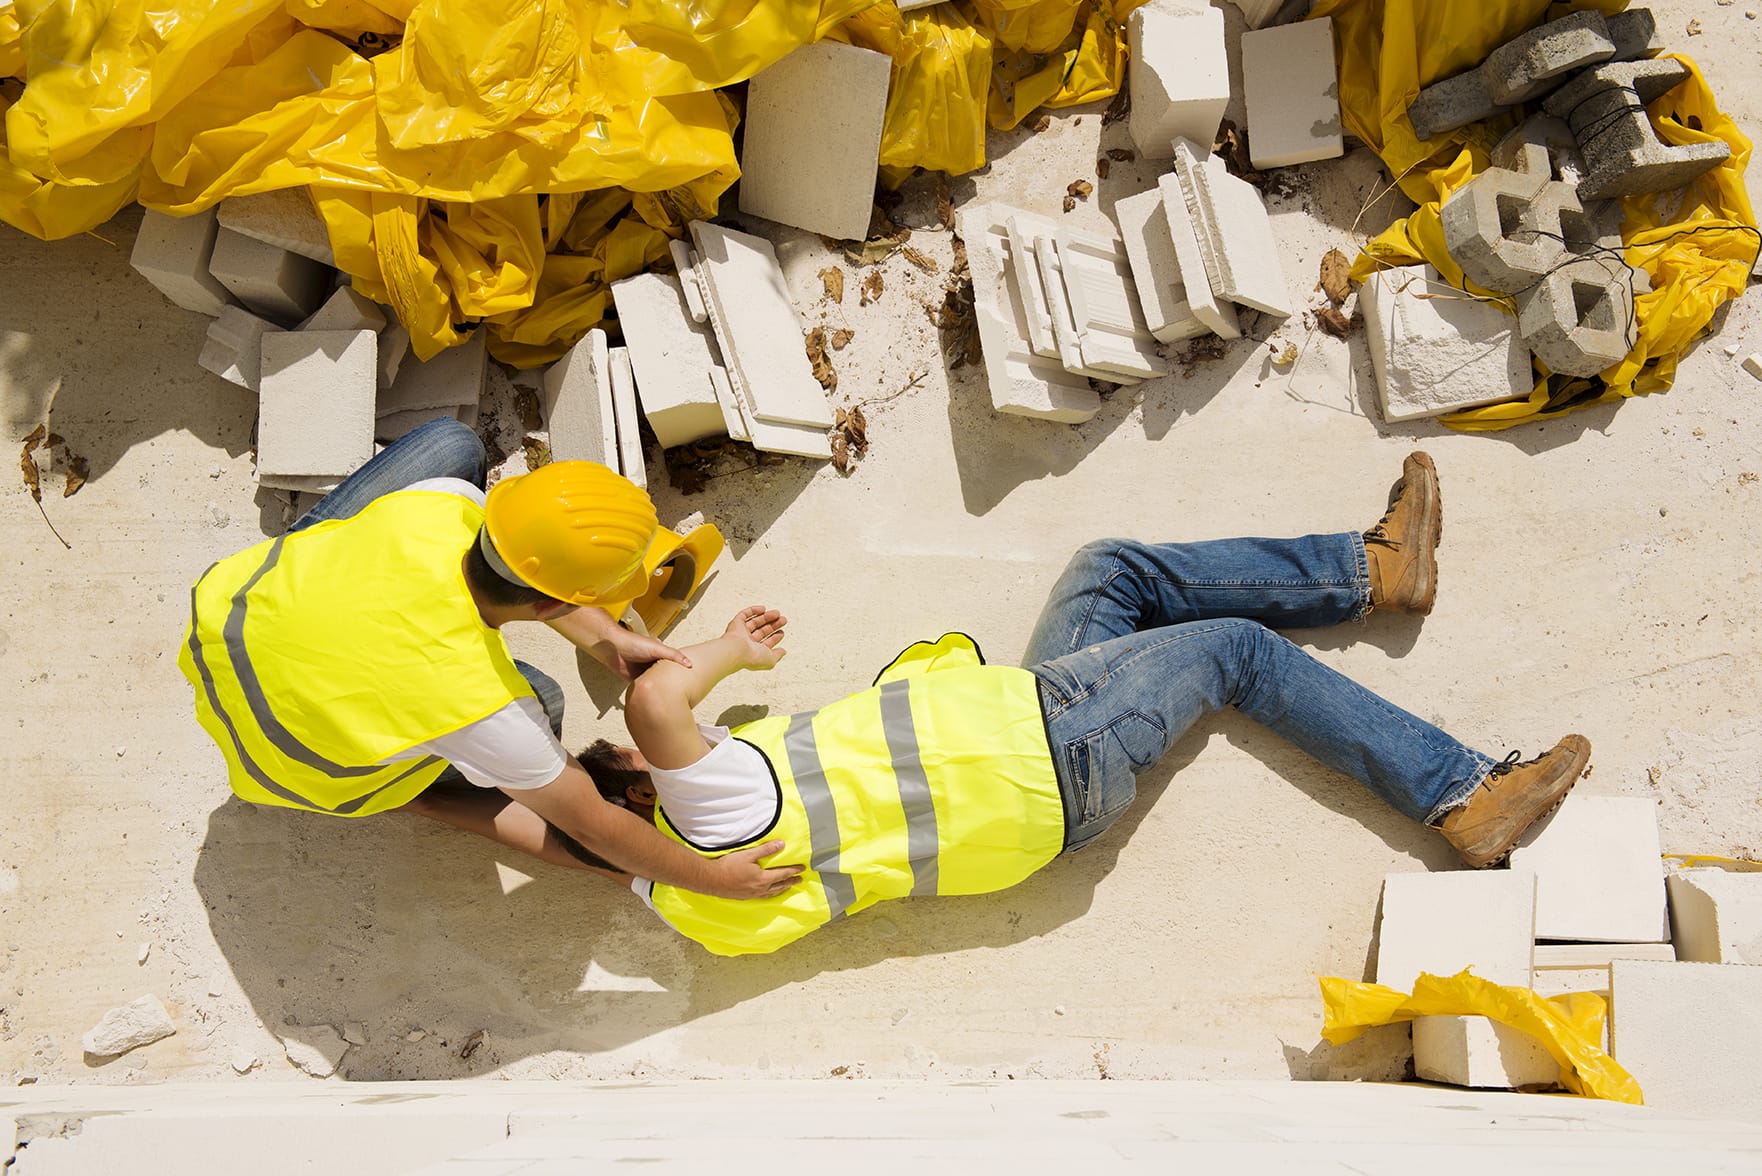 can-i-file-an-injury-claim-if-i-slipped-and-fell-in-an-office-building